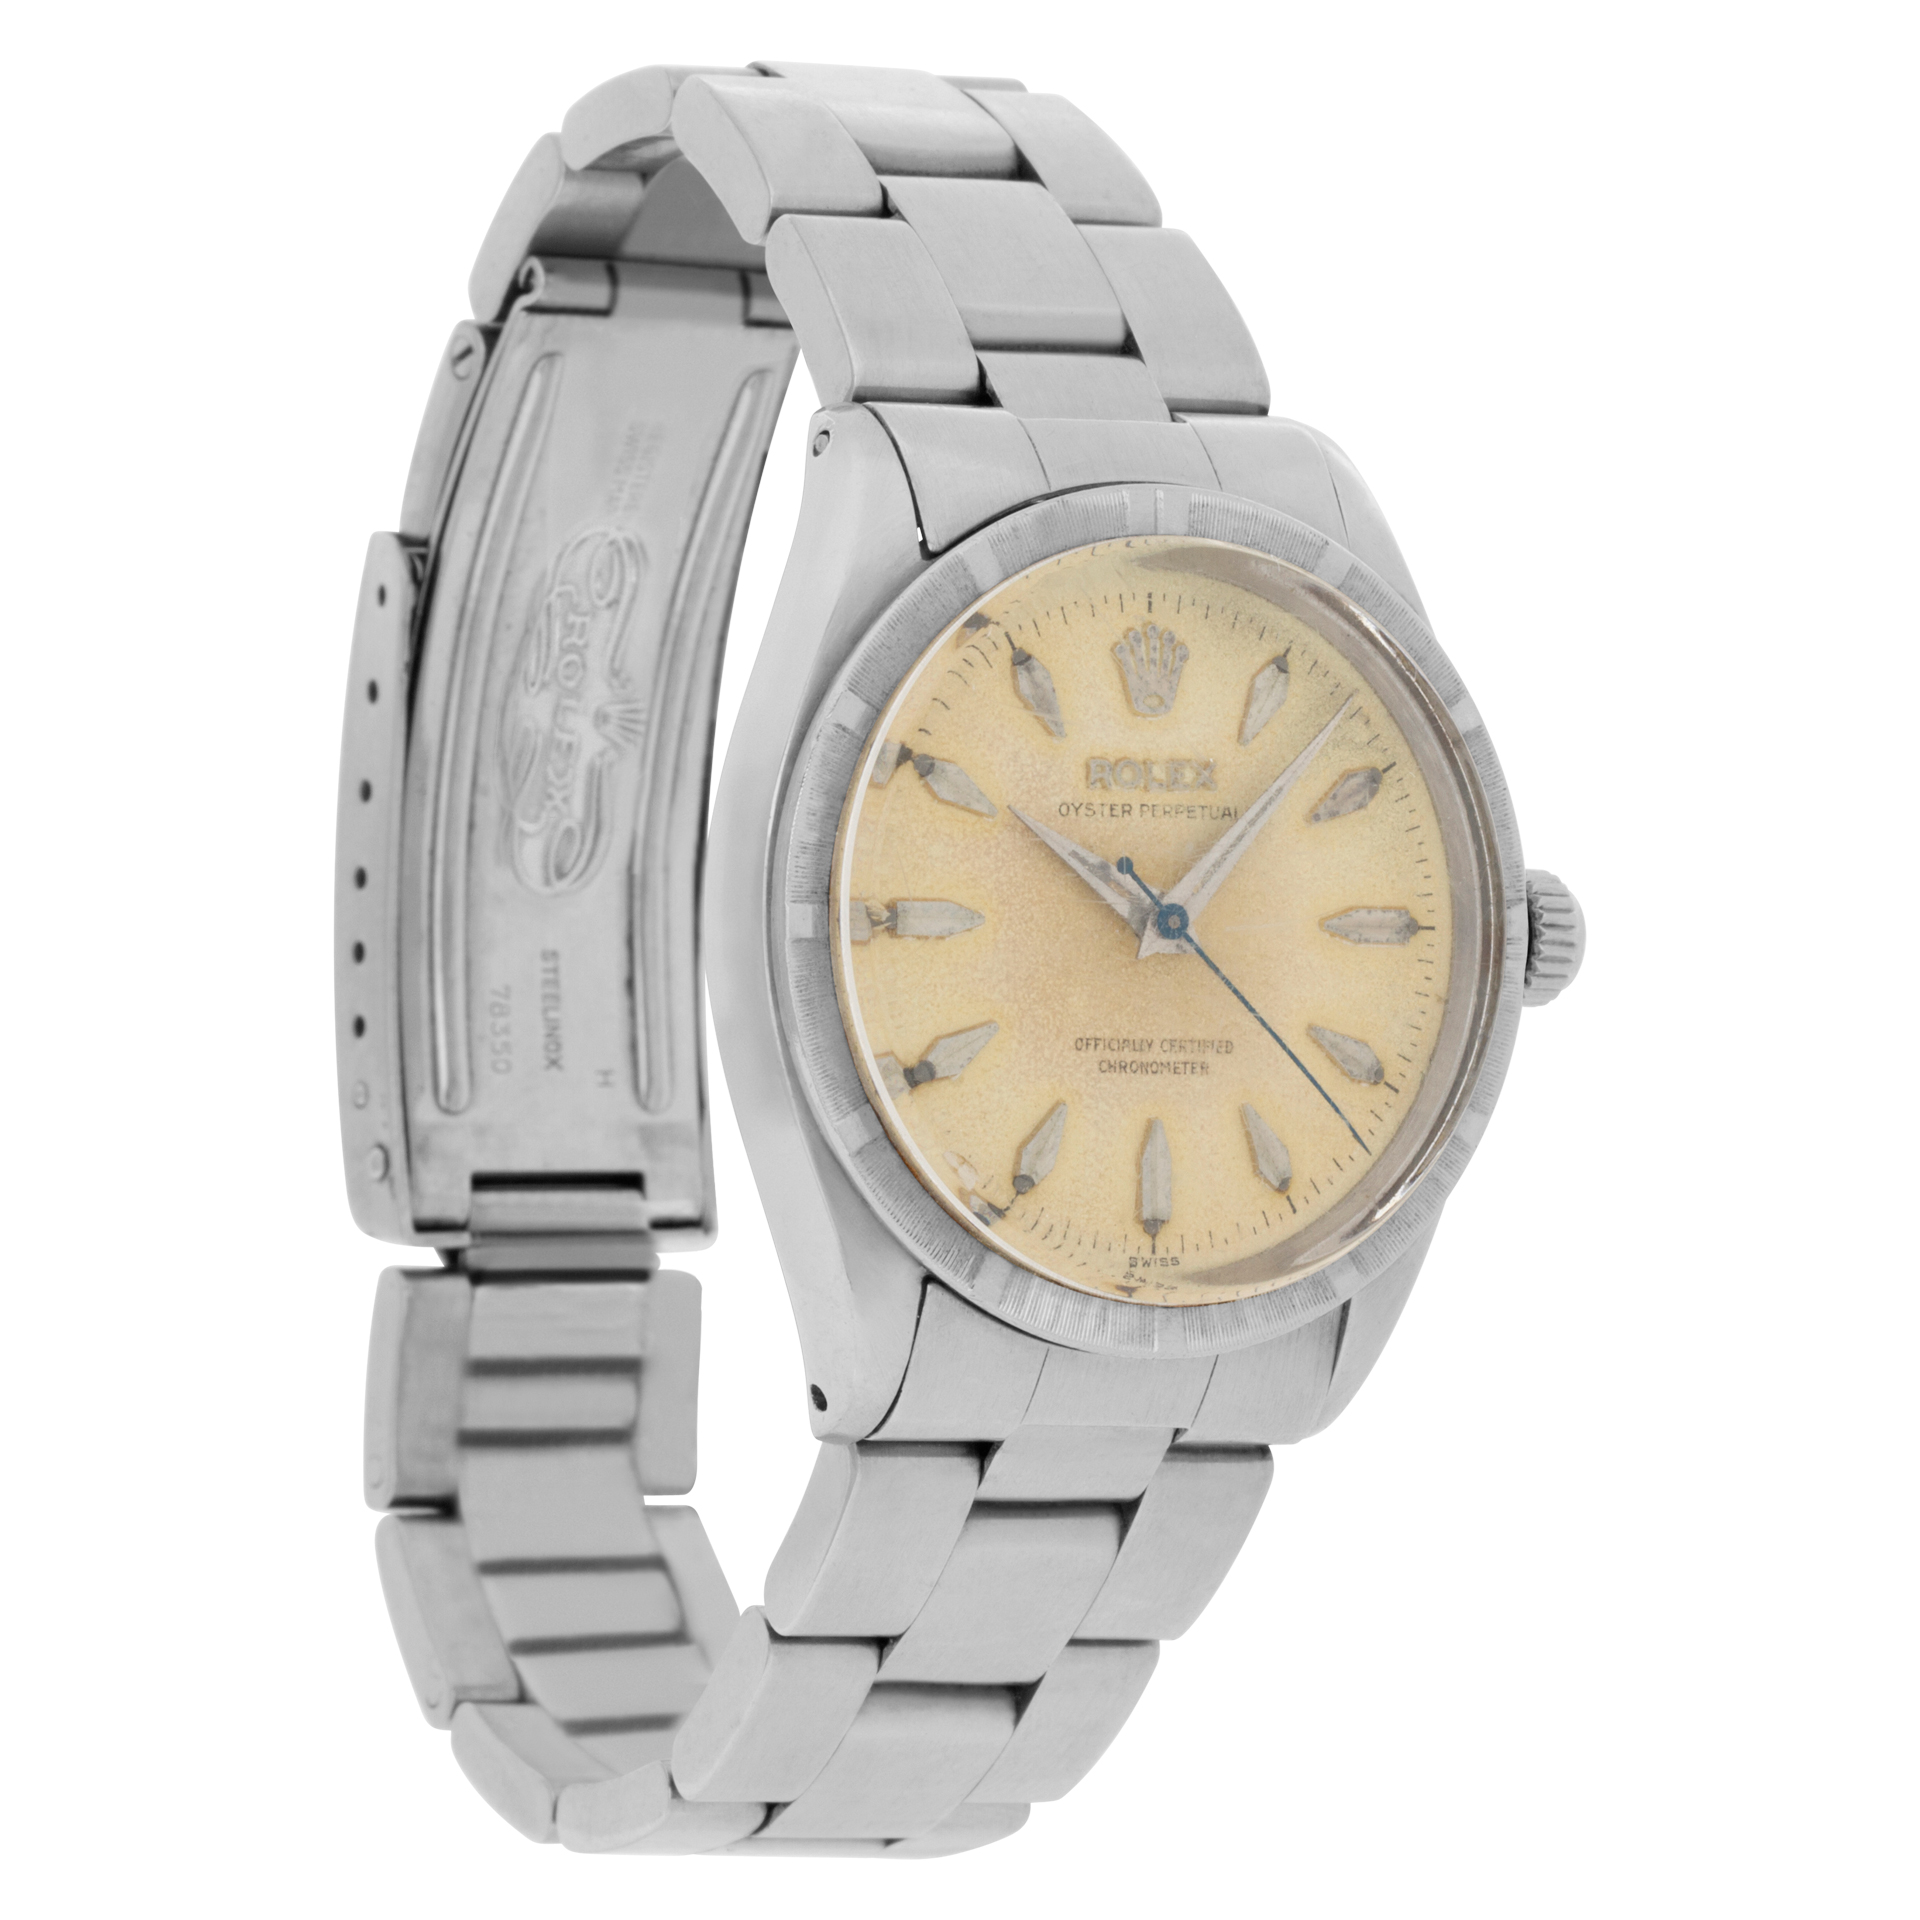 Rolex Oyster Perpetual 34mm 6569 image 3